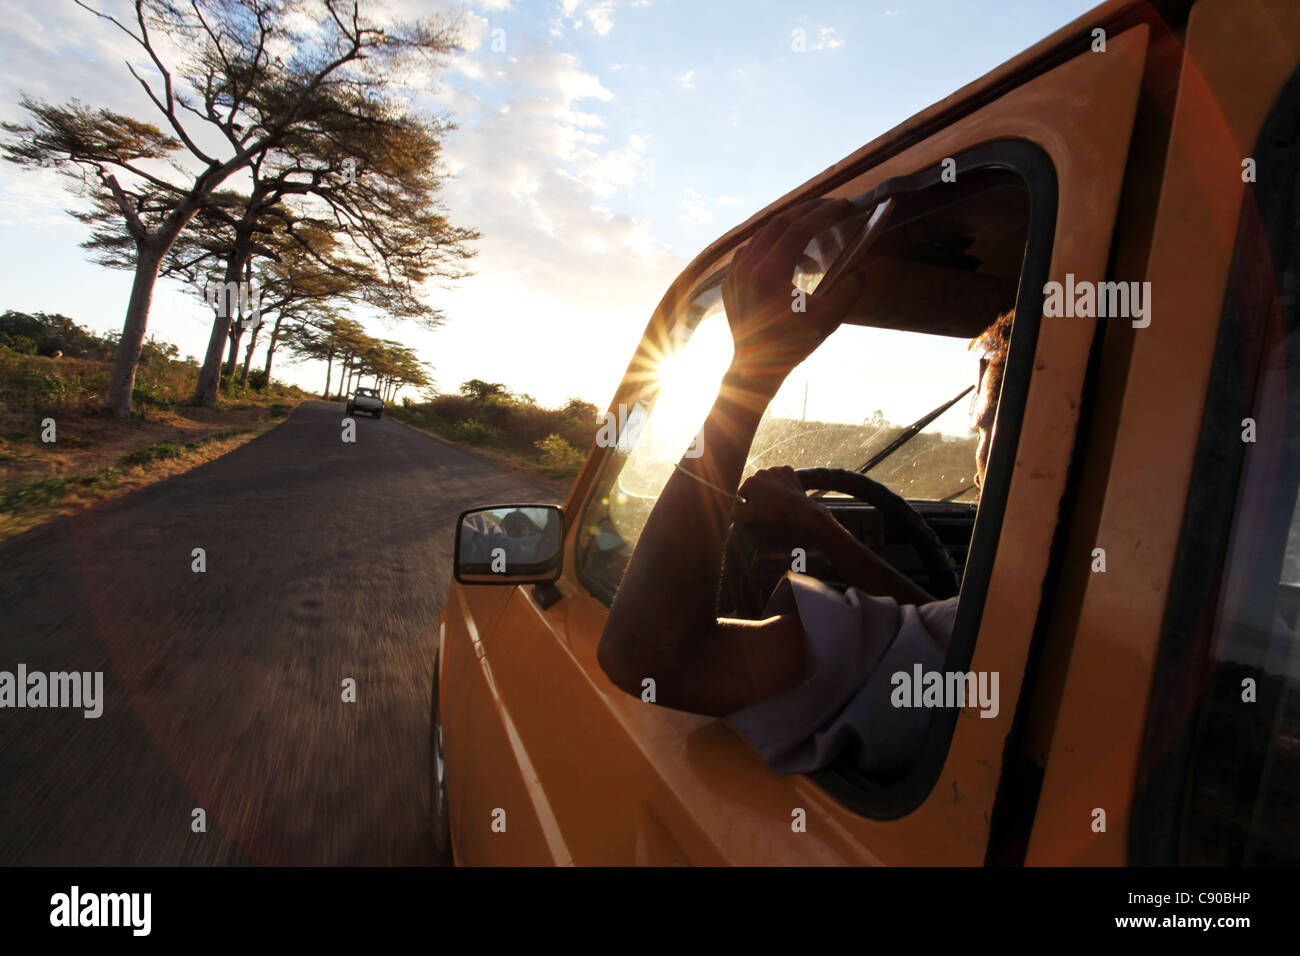 A taxi ride between Hell-Ville and Madirokely, Crater Bay, Nosy Be, Madagascar, with a star burst setting sun Stock Photo